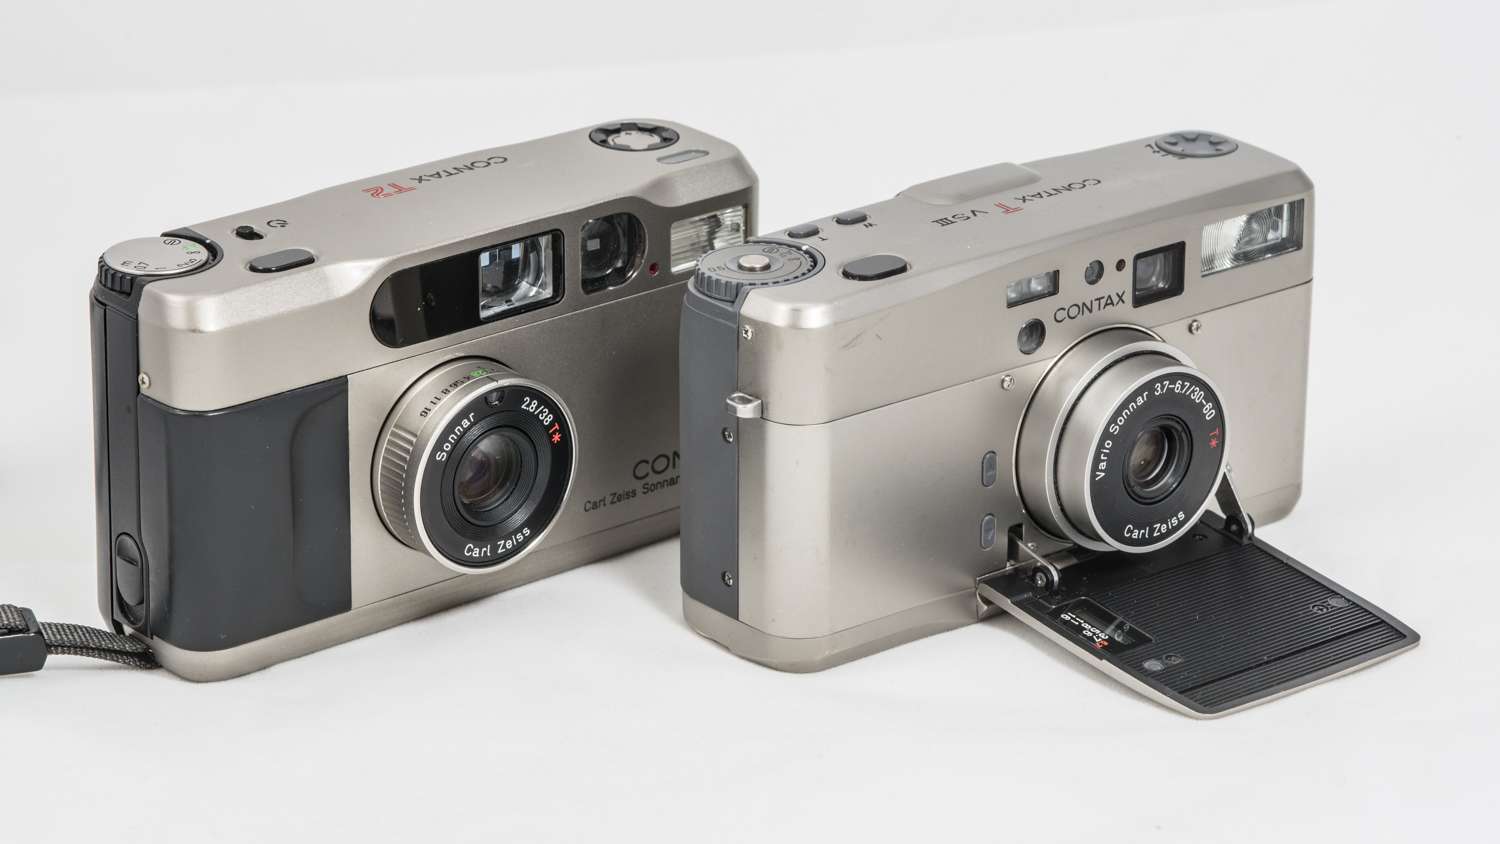 The Contax TVS-III - Another wonderful compact 35mm camera 